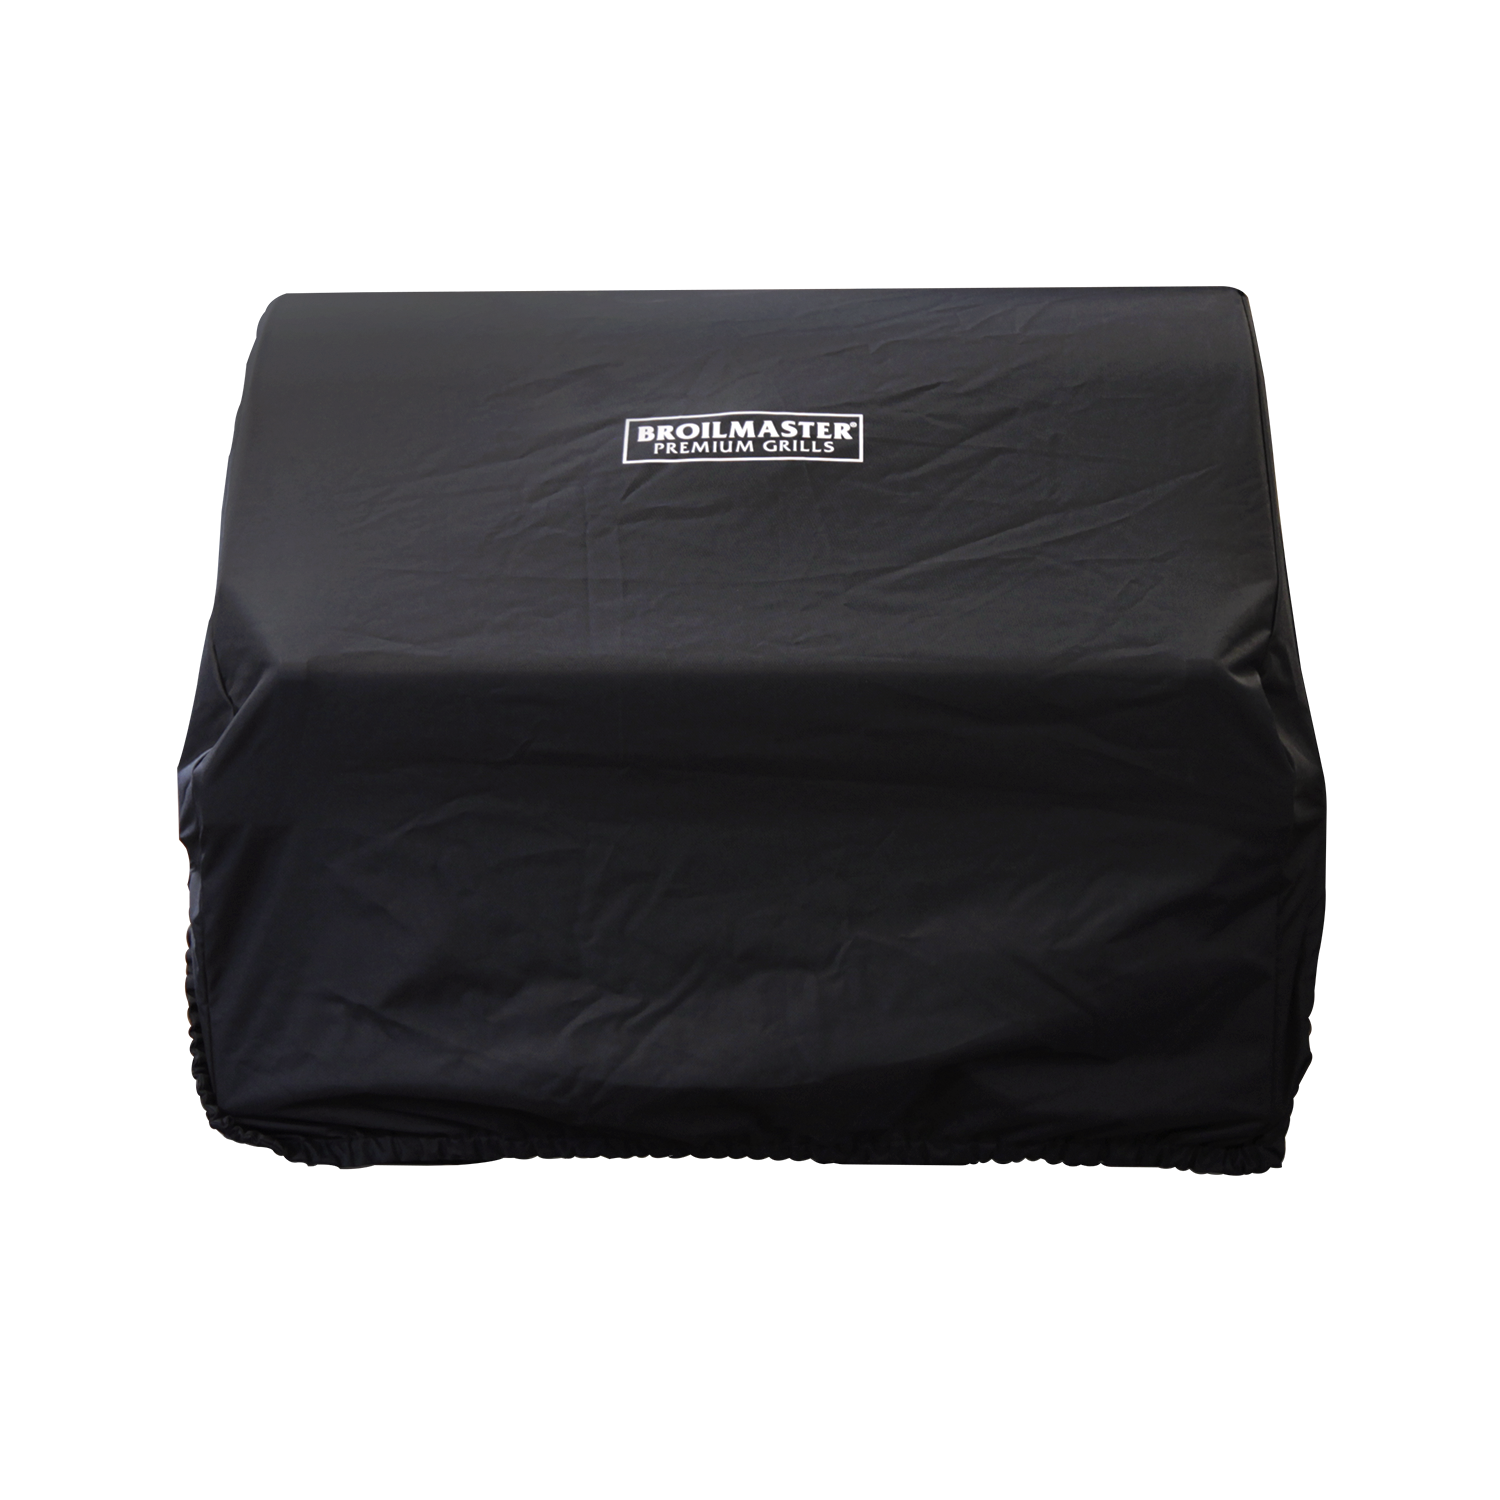 Broilmaster Cover For 26" Built-In Grill